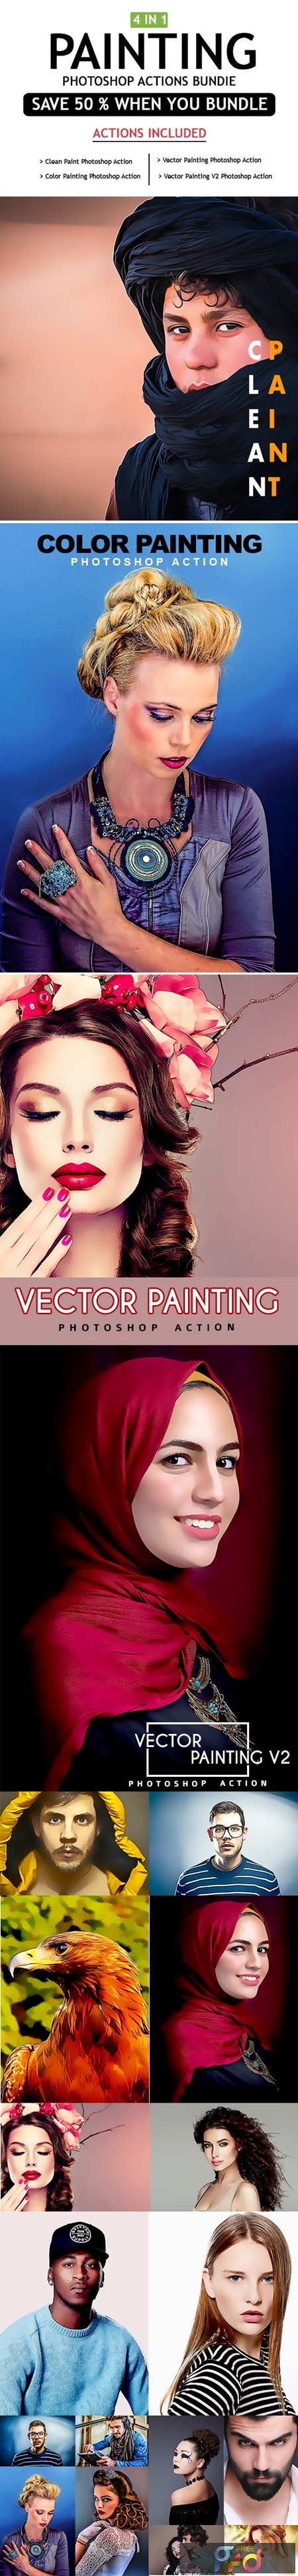 Painting 4 IN 1 Photoshop Actions Bundle 25490966 1